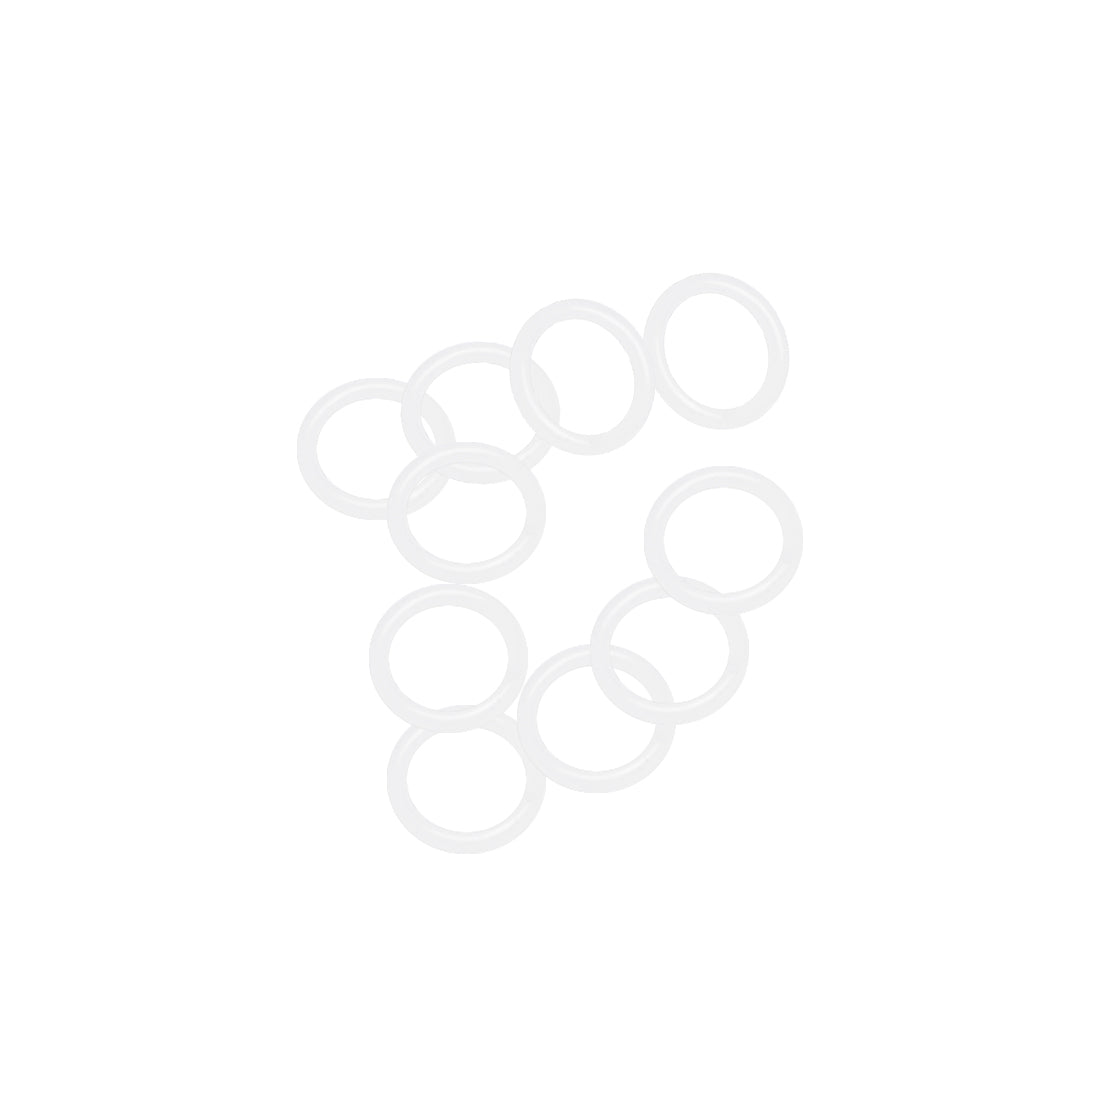 uxcell Uxcell Silicone O-Rings 18mm OD, 13.2mm ID, 2.4mm Width, Seal Gasket White 10Pcs